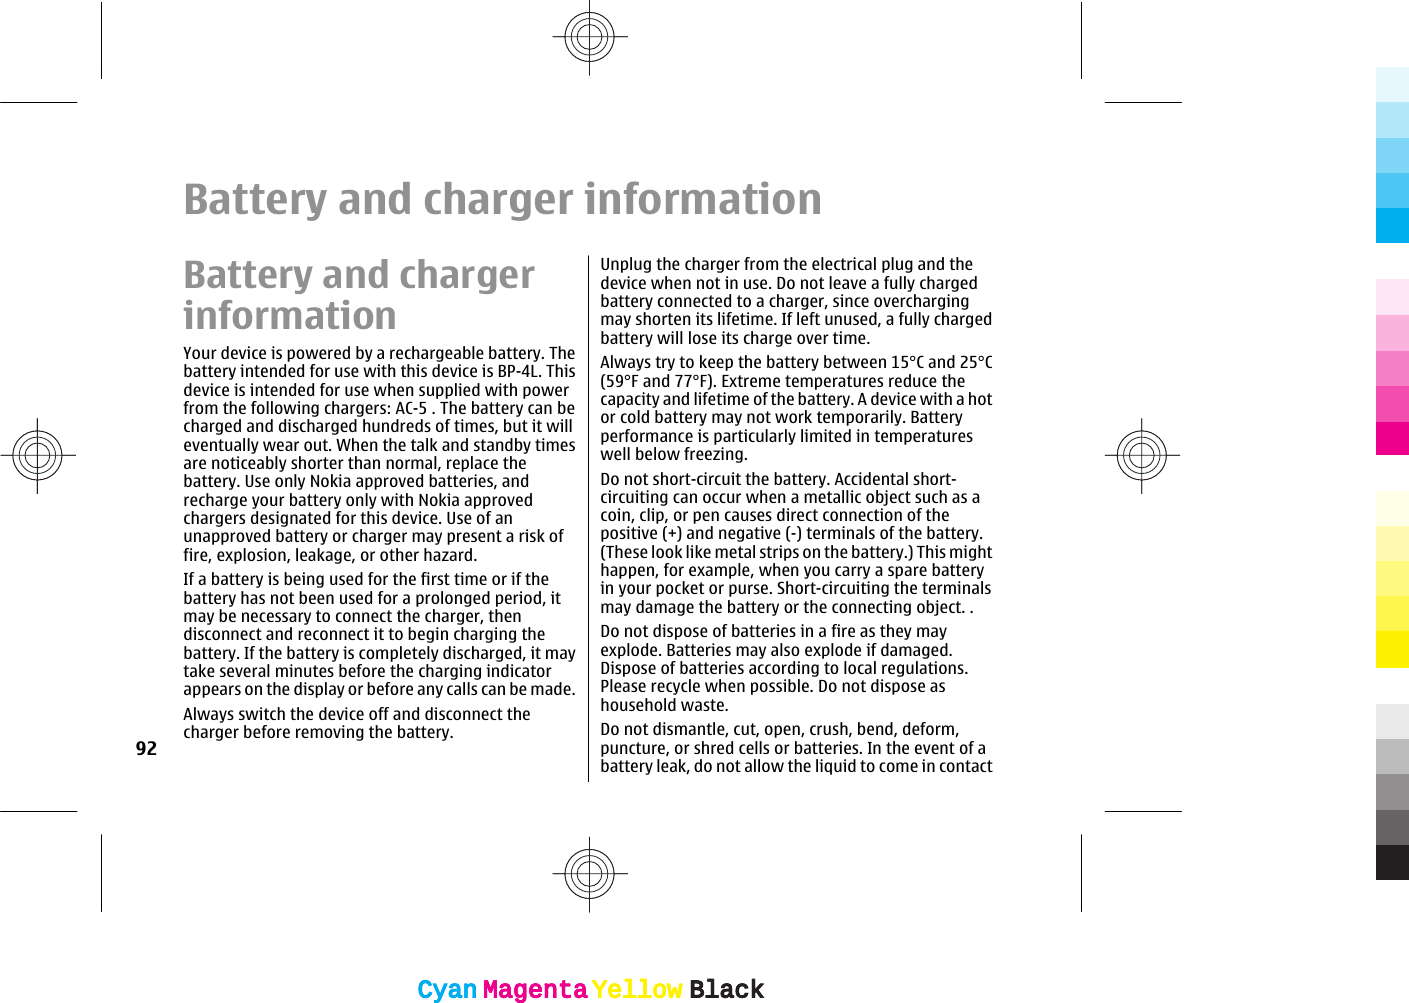 Battery and charger informationBattery and chargerinformationYour device is powered by a rechargeable battery. Thebattery intended for use with this device is BP-4L. Thisdevice is intended for use when supplied with powerfrom the following chargers: AC-5 . The battery can becharged and discharged hundreds of times, but it willeventually wear out. When the talk and standby timesare noticeably shorter than normal, replace thebattery. Use only Nokia approved batteries, andrecharge your battery only with Nokia approvedchargers designated for this device. Use of anunapproved battery or charger may present a risk offire, explosion, leakage, or other hazard.If a battery is being used for the first time or if thebattery has not been used for a prolonged period, itmay be necessary to connect the charger, thendisconnect and reconnect it to begin charging thebattery. If the battery is completely discharged, it maytake several minutes before the charging indicatorappears on the display or before any calls can be made.Always switch the device off and disconnect thecharger before removing the battery.Unplug the charger from the electrical plug and thedevice when not in use. Do not leave a fully chargedbattery connected to a charger, since overchargingmay shorten its lifetime. If left unused, a fully chargedbattery will lose its charge over time.Always try to keep the battery between 15°C and 25°C(59°F and 77°F). Extreme temperatures reduce thecapacity and lifetime of the battery. A device with a hotor cold battery may not work temporarily. Batteryperformance is particularly limited in temperatureswell below freezing.Do not short-circuit the battery. Accidental short-circuiting can occur when a metallic object such as acoin, clip, or pen causes direct connection of thepositive (+) and negative (-) terminals of the battery.(These look like metal strips on the battery.) This mighthappen, for example, when you carry a spare batteryin your pocket or purse. Short-circuiting the terminalsmay damage the battery or the connecting object. .Do not dispose of batteries in a fire as they mayexplode. Batteries may also explode if damaged.Dispose of batteries according to local regulations.Please recycle when possible. Do not dispose ashousehold waste.Do not dismantle, cut, open, crush, bend, deform,puncture, or shred cells or batteries. In the event of abattery leak, do not allow the liquid to come in contact92CyanCyanMagentaMagentaYellowYellowBlackBlackCyanCyanMagentaMagentaYellowYellowBlackBlack